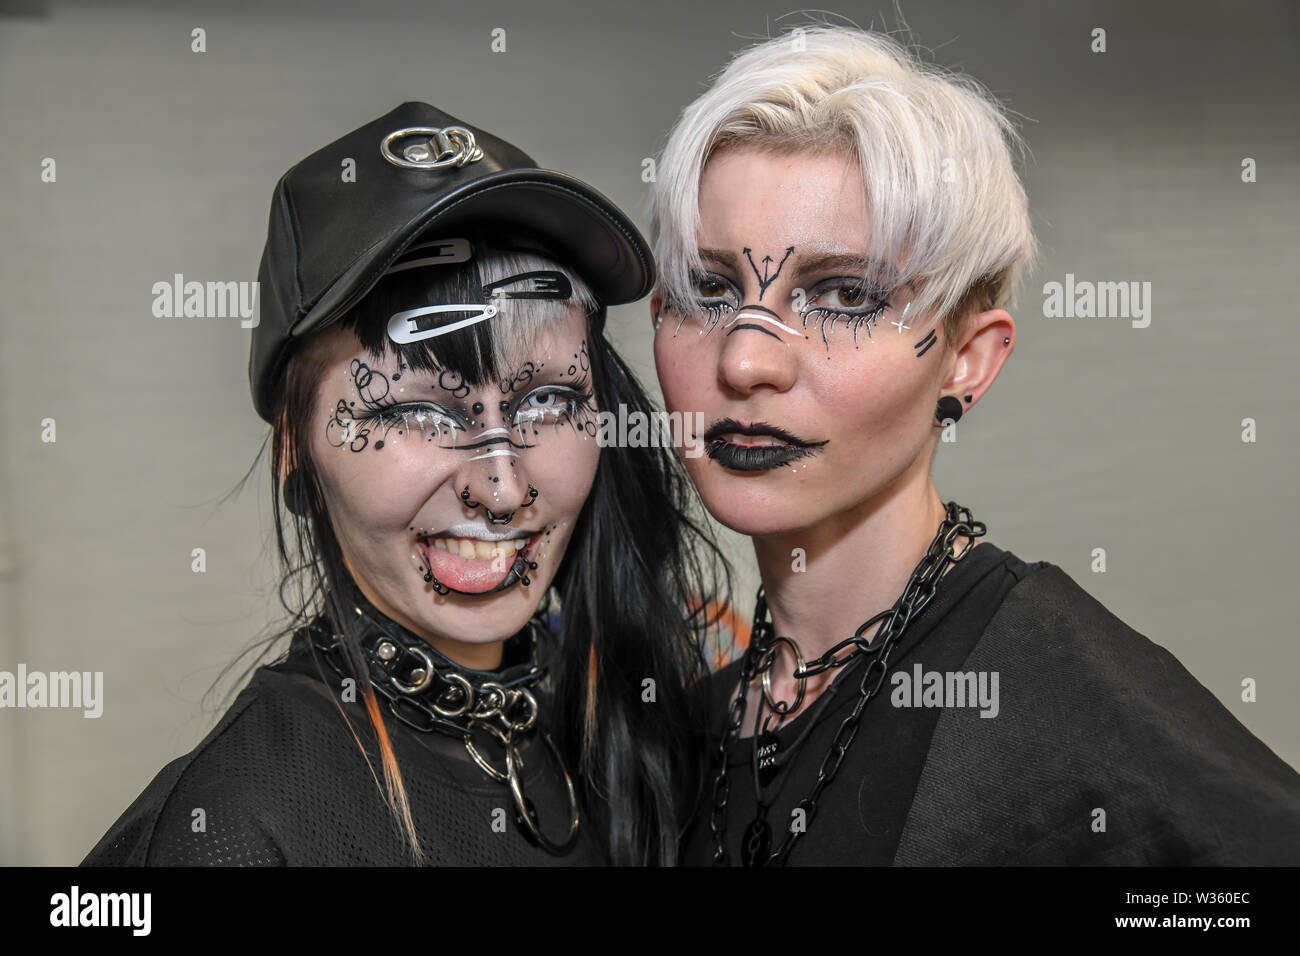 London, UK. 12th July, 2019. Hyper Japan Festival 2019, which features shopping, entertainment, cosplay, fashion and food from Japan on 12 July 2019, Olympia London, UK. Credit: Picture Capital/Alamy Live News Stock Photo